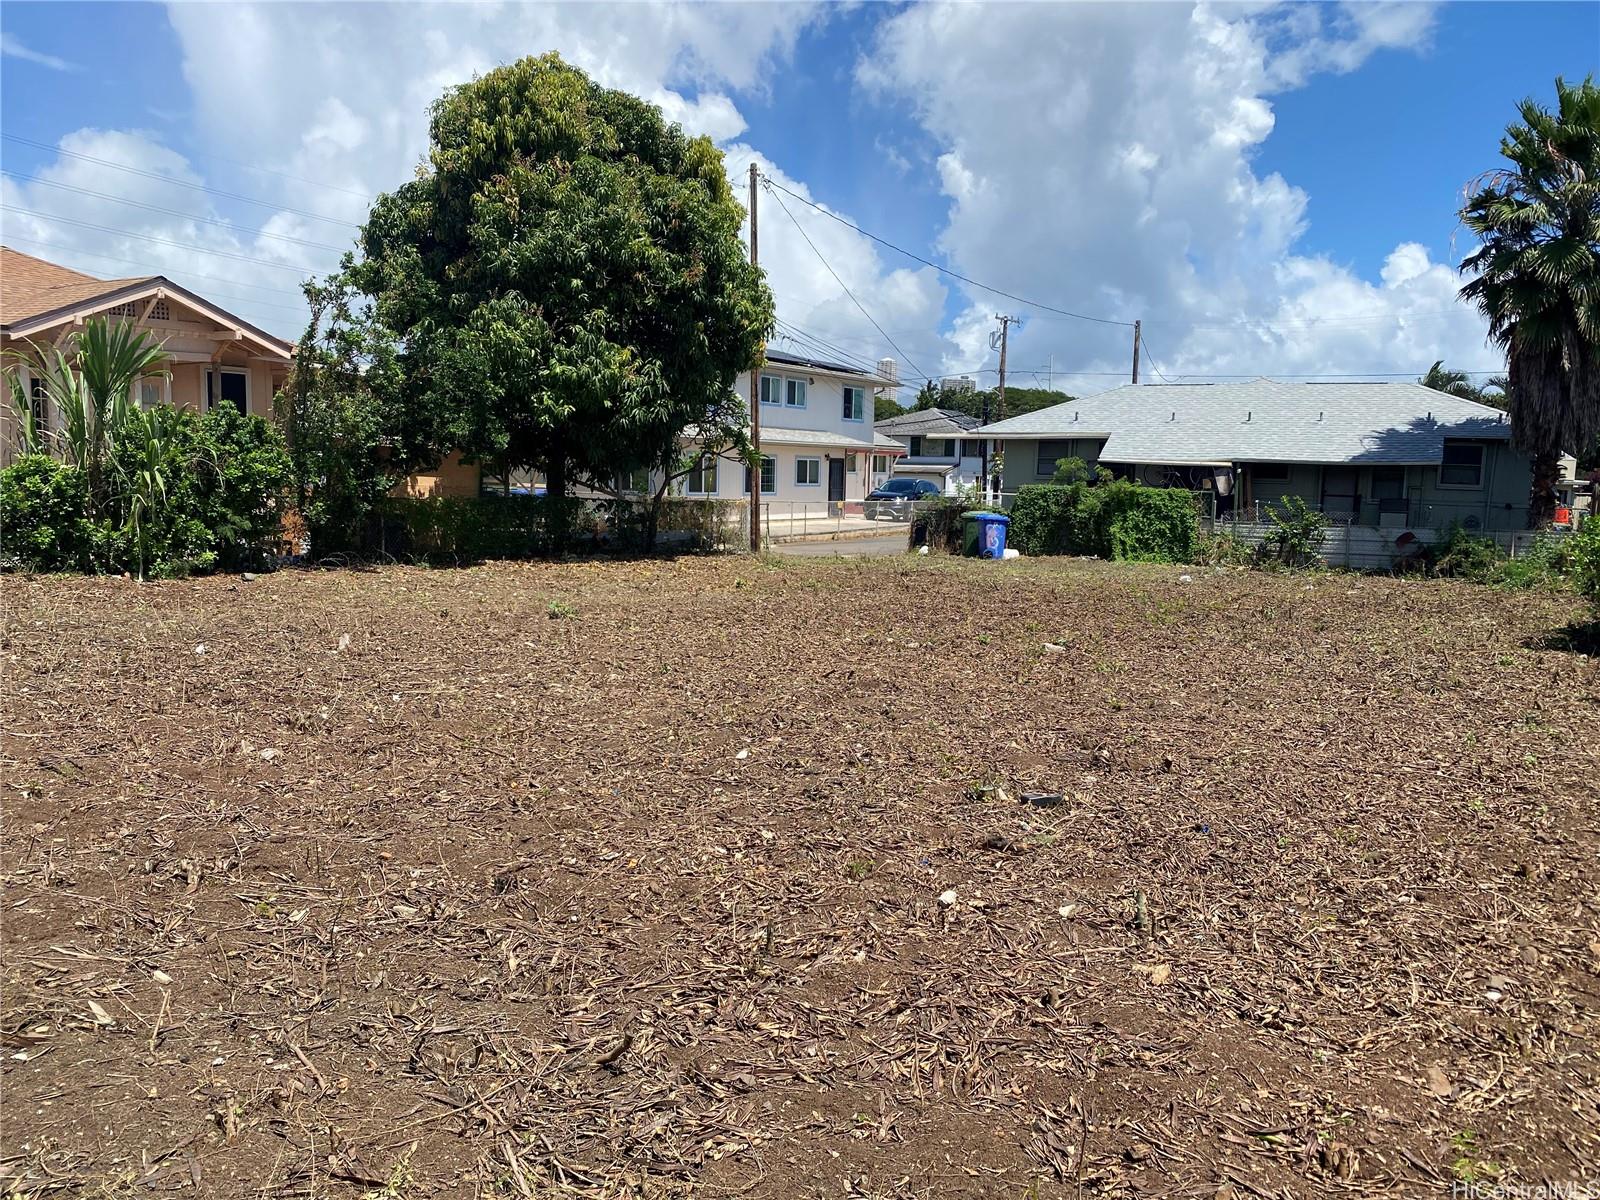 98-232B Kaluamoi Place  Pearl City, Hi vacant land for sale - photo 1 of 3